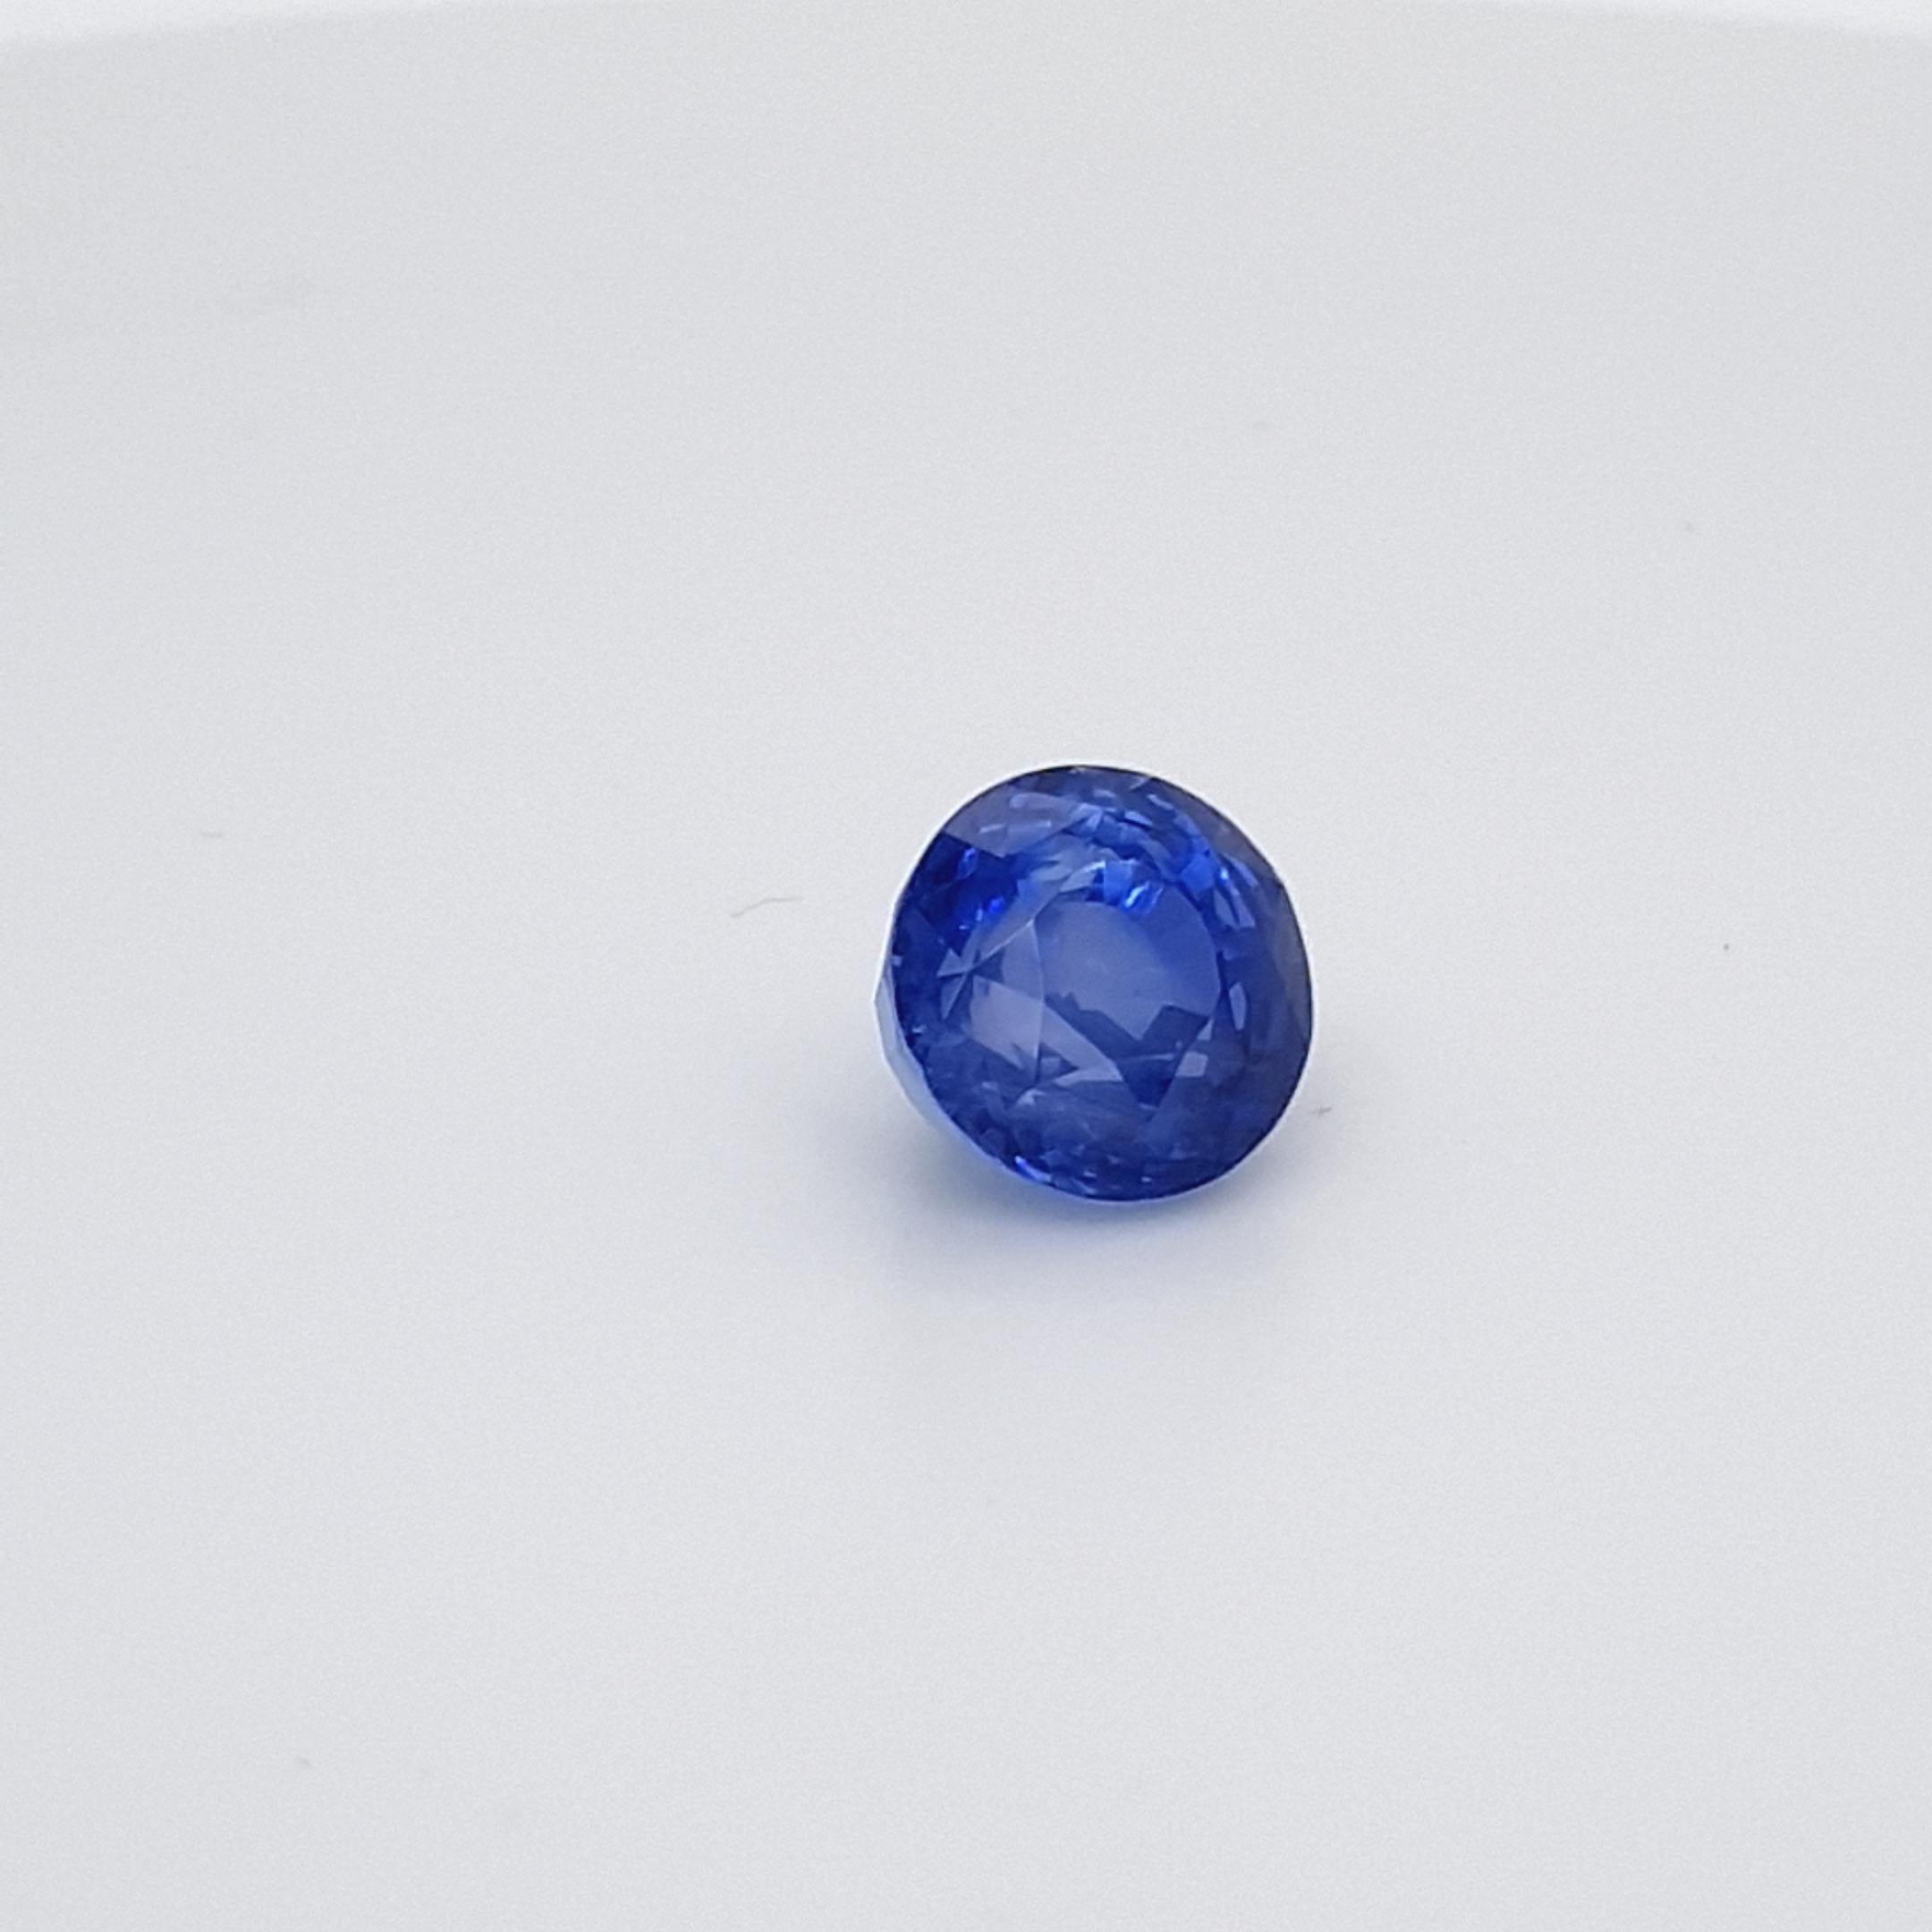 We are delighted to be able to offer for sale, this 5,91 ct. blue Sapphire of our exclusive collection.
This beautiful gem has almost cornflower blue color and a great fire. In the middle of the stone is a visible 